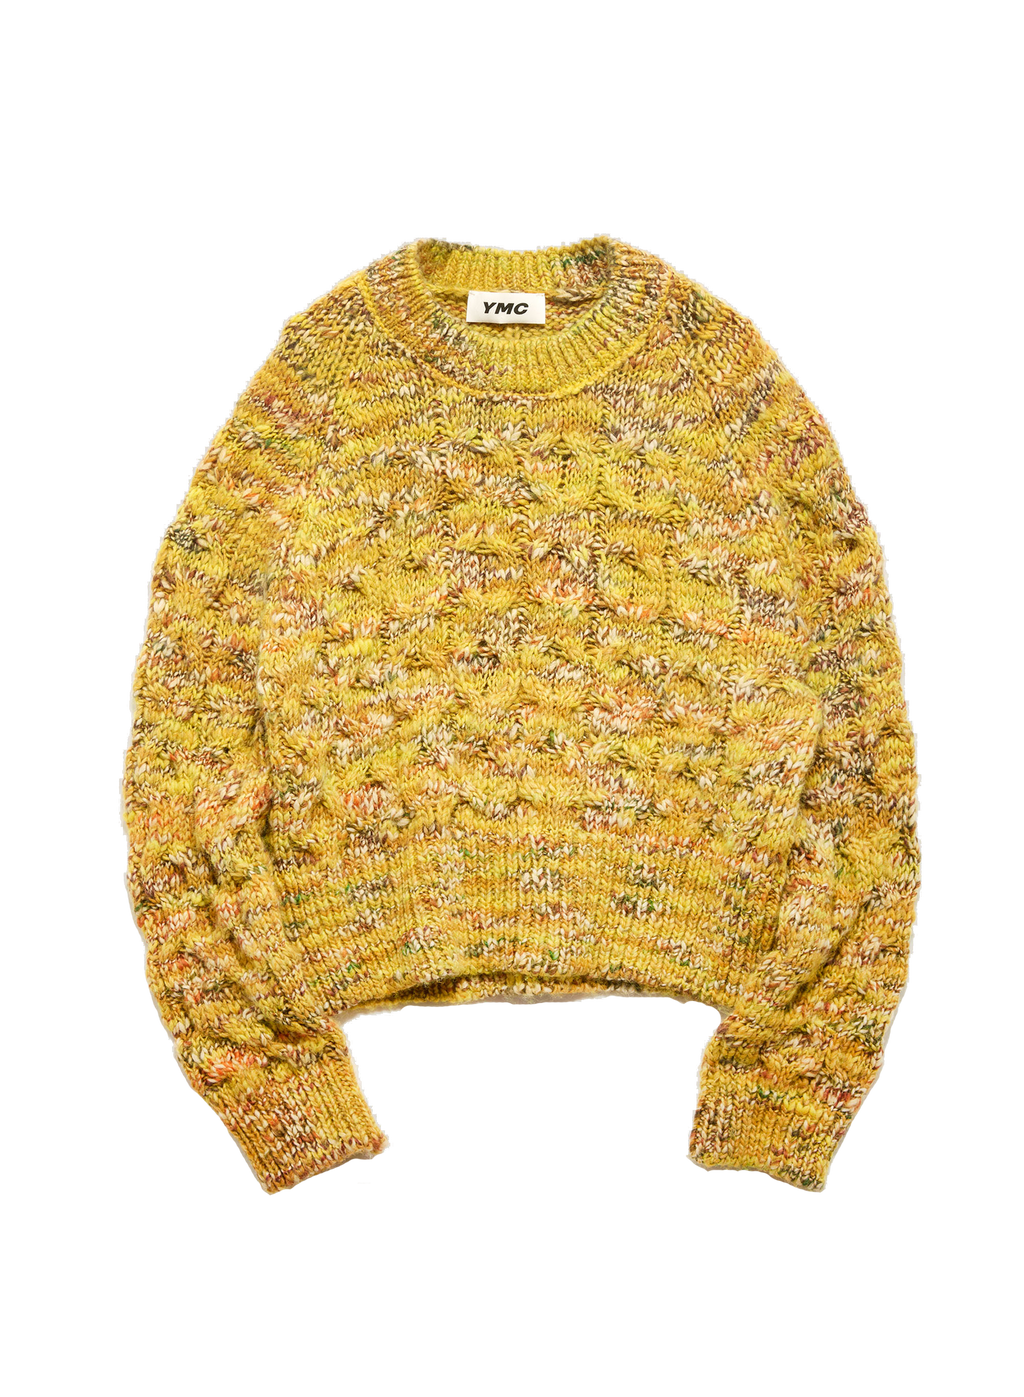 Pez Space Dyed Crew Neck Jumper Yellow Multi